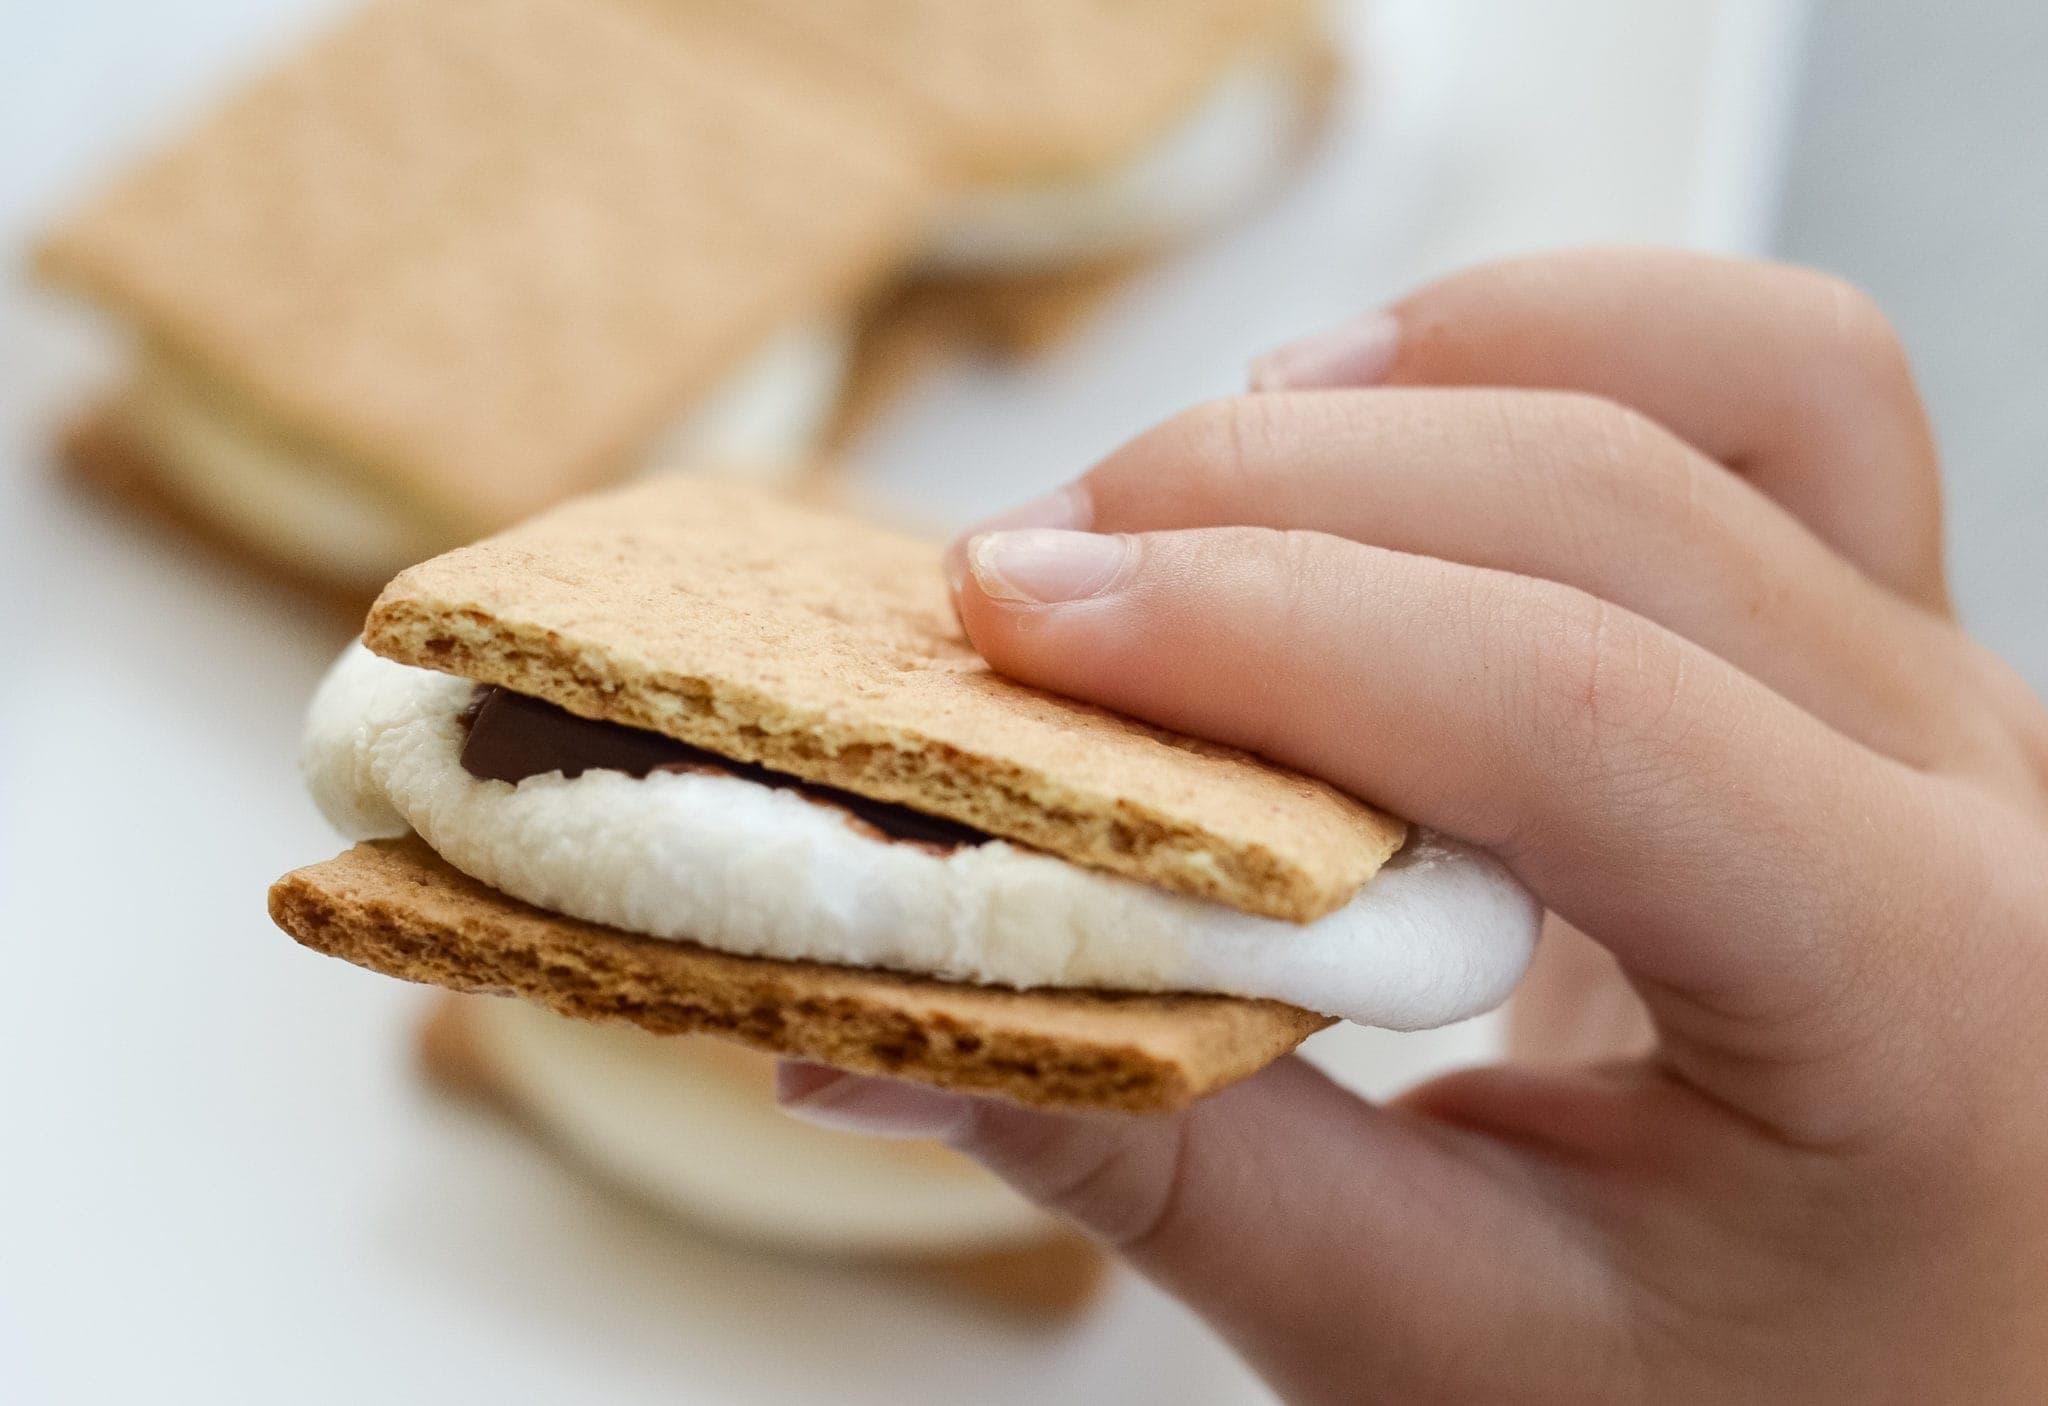 Easy Air Fryer S'mores